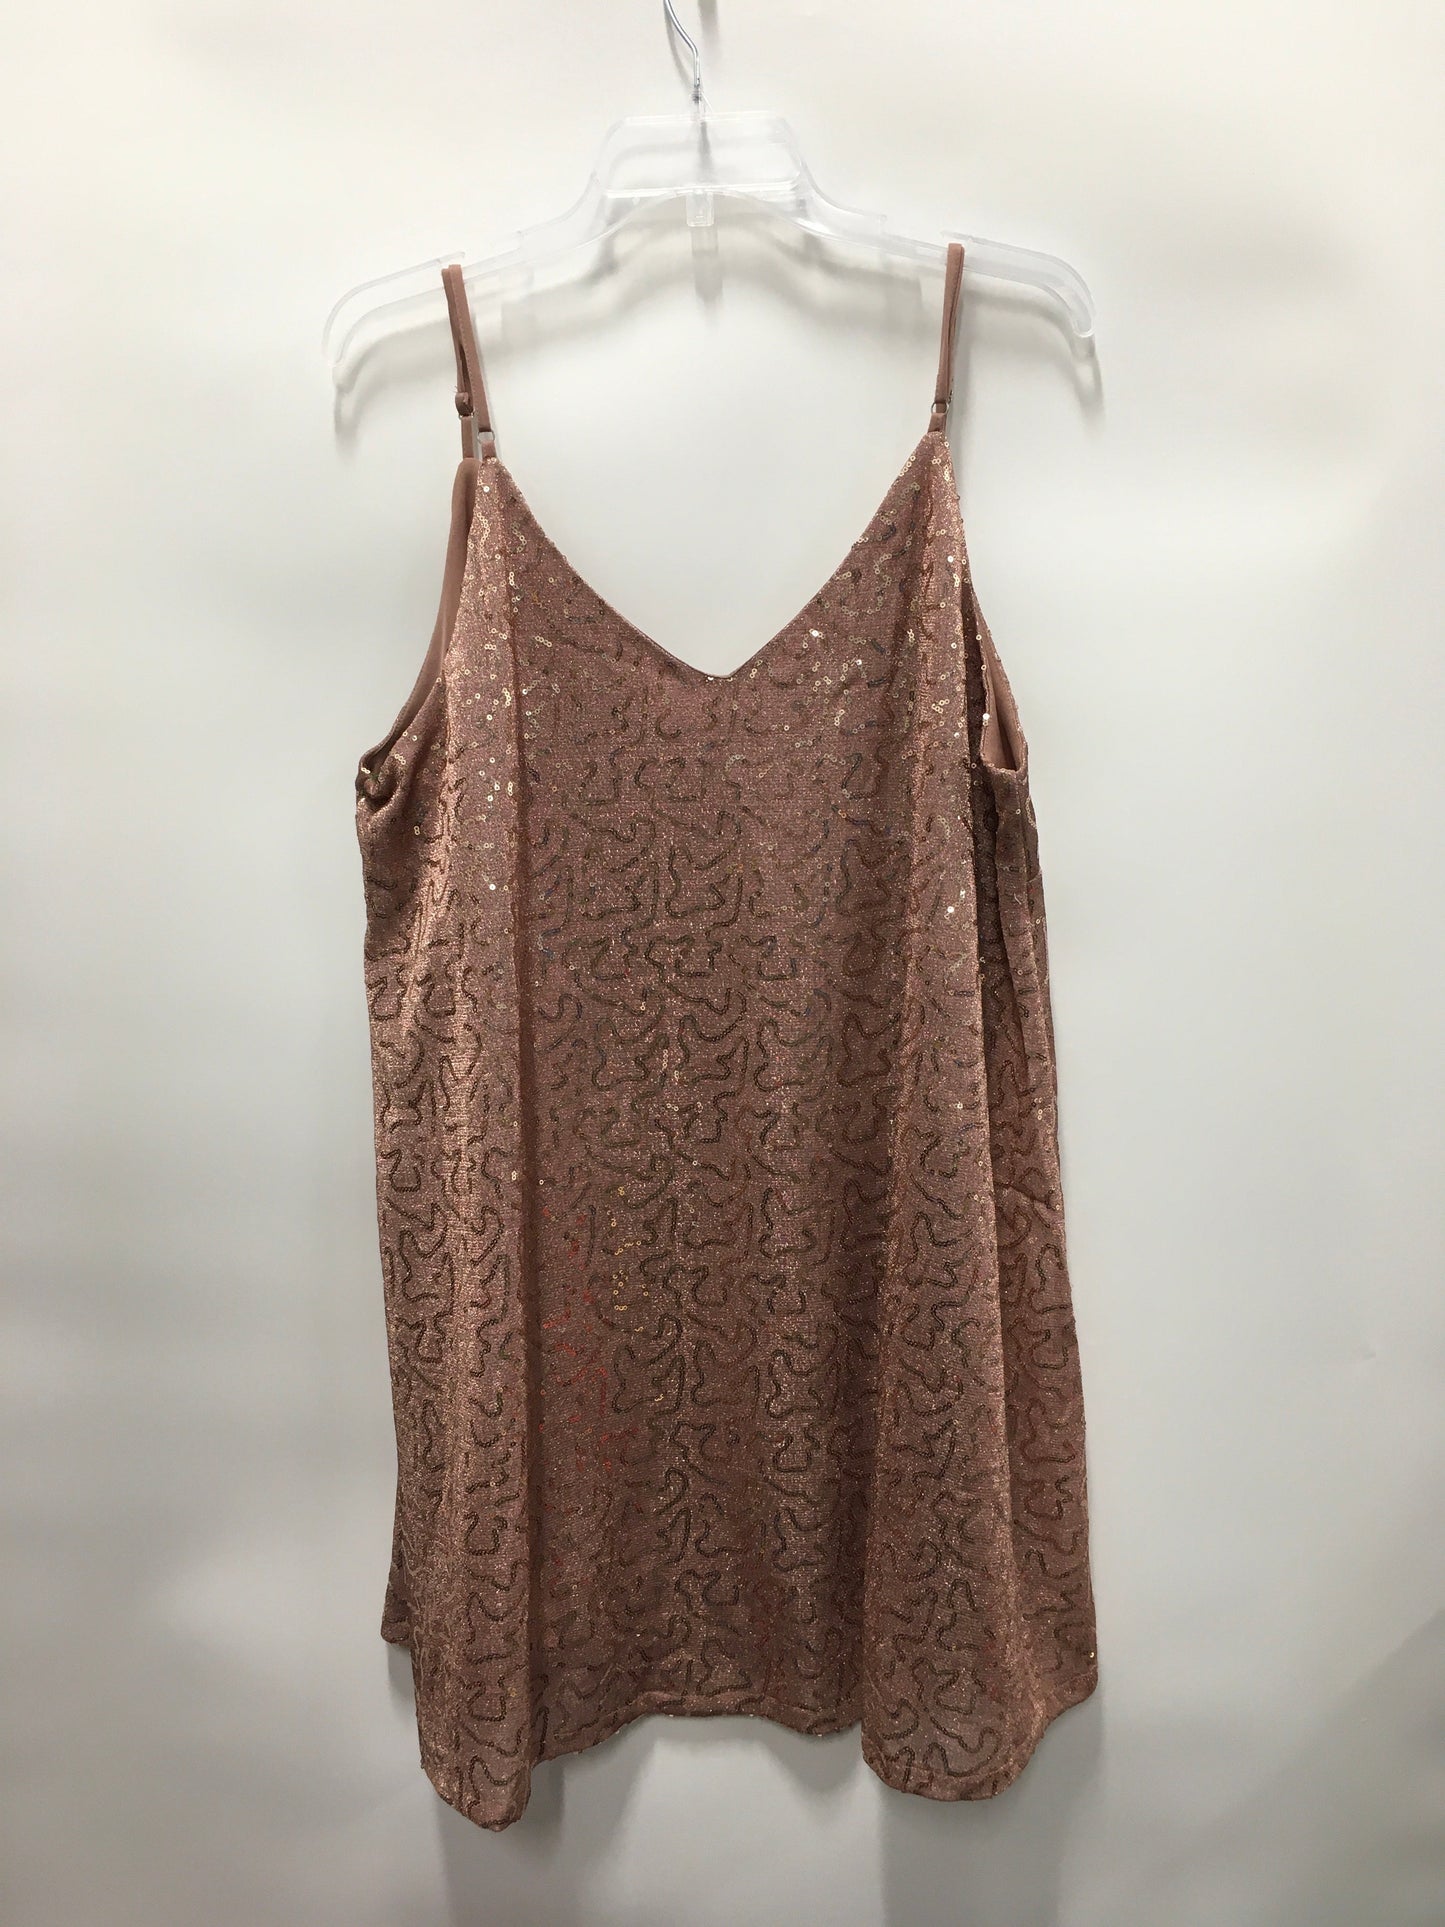 Top Sleeveless By Clothes Mentor  Size: 2x